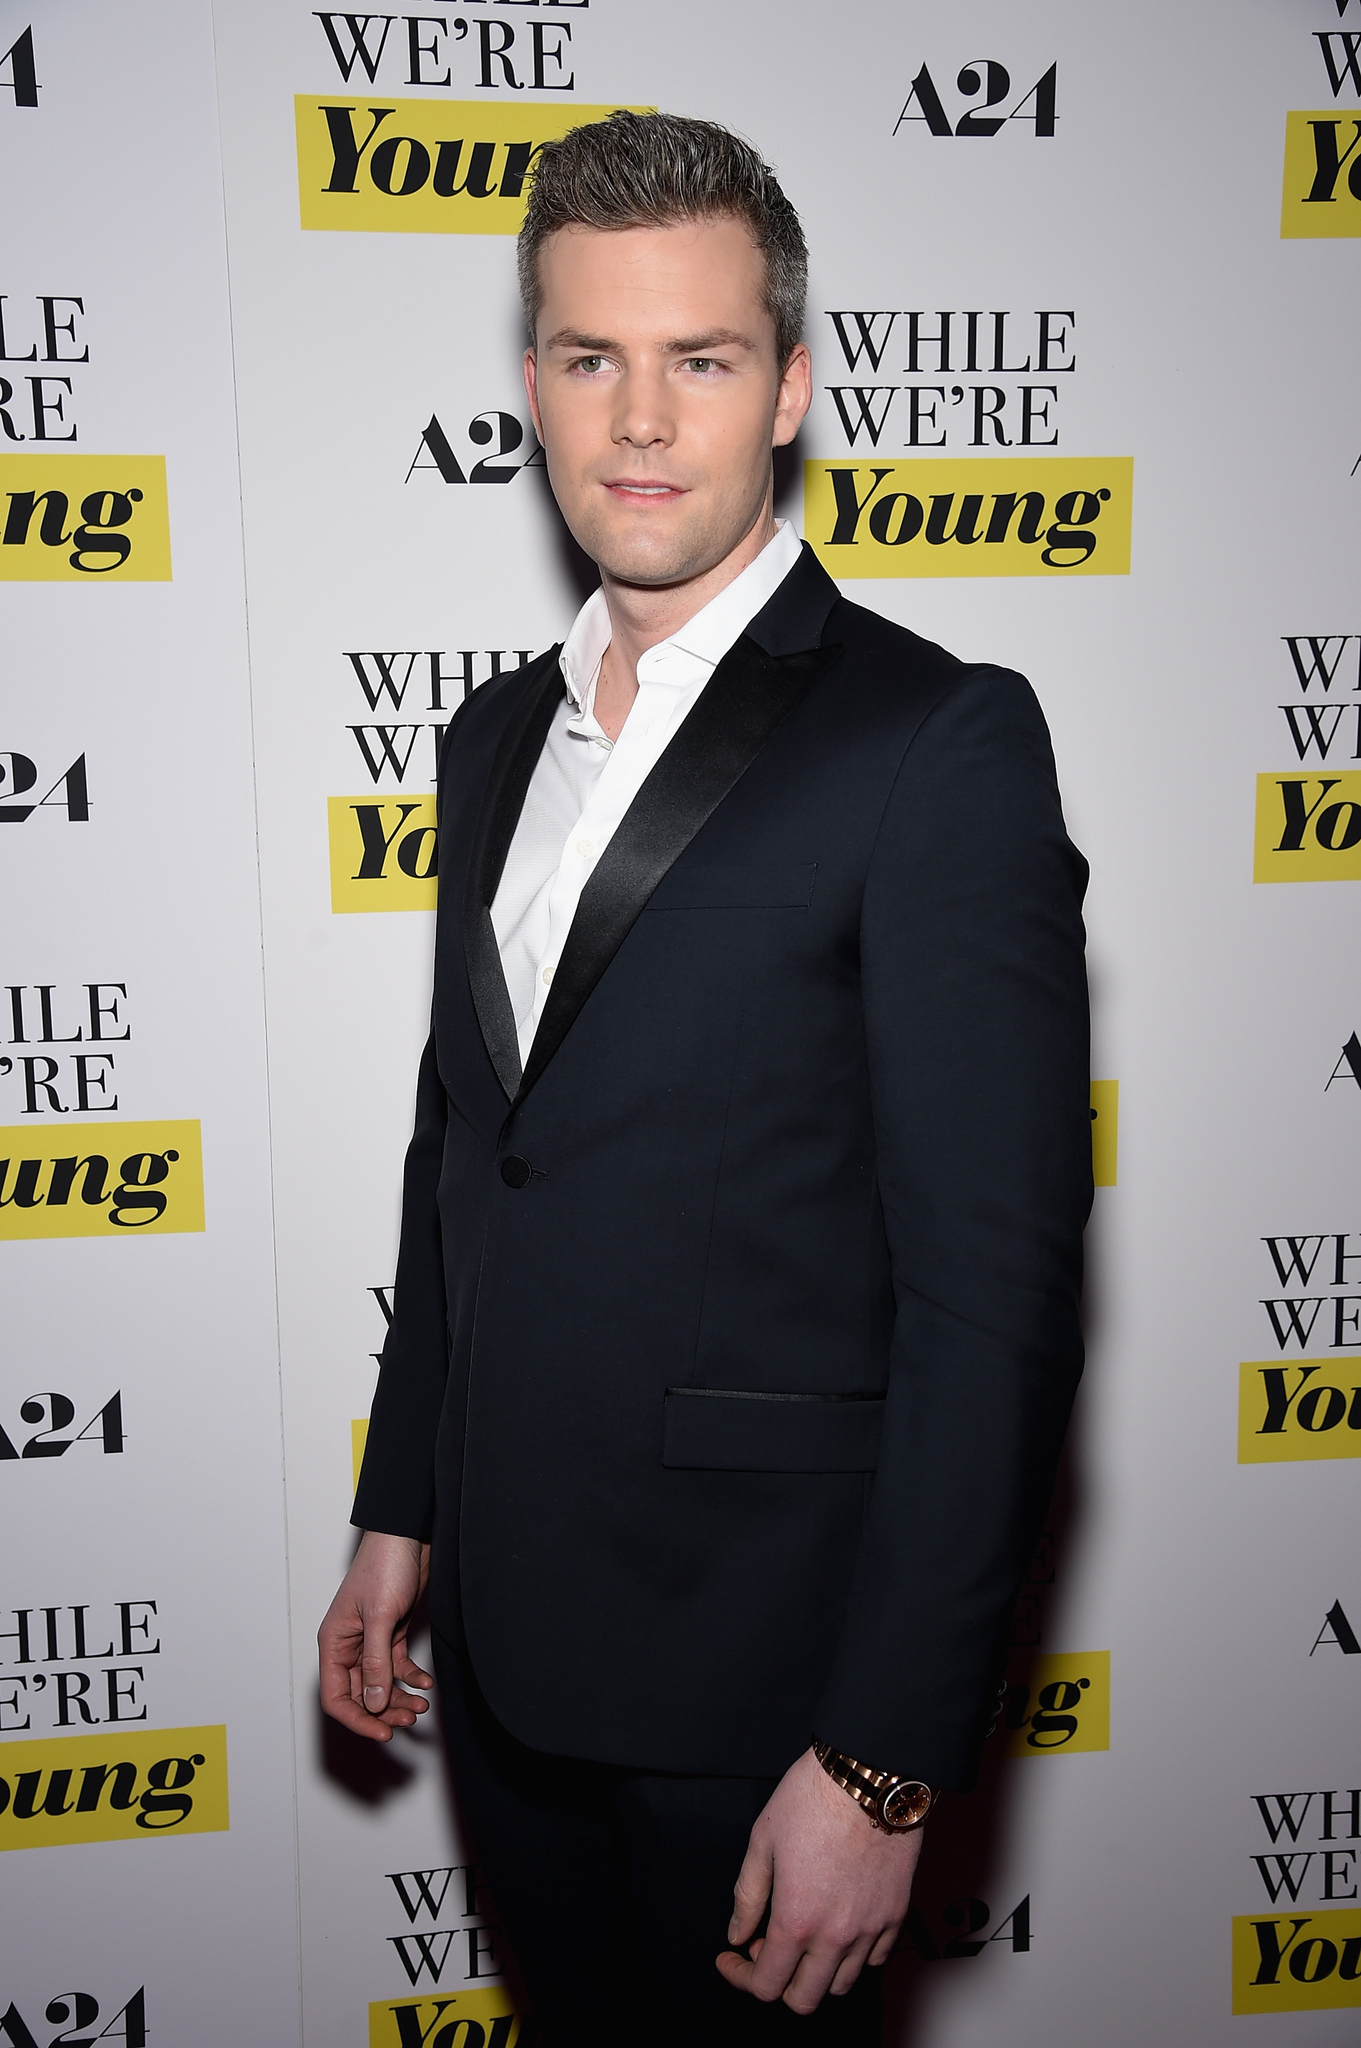 Ryan Serhant at event of While We're Young (2014)